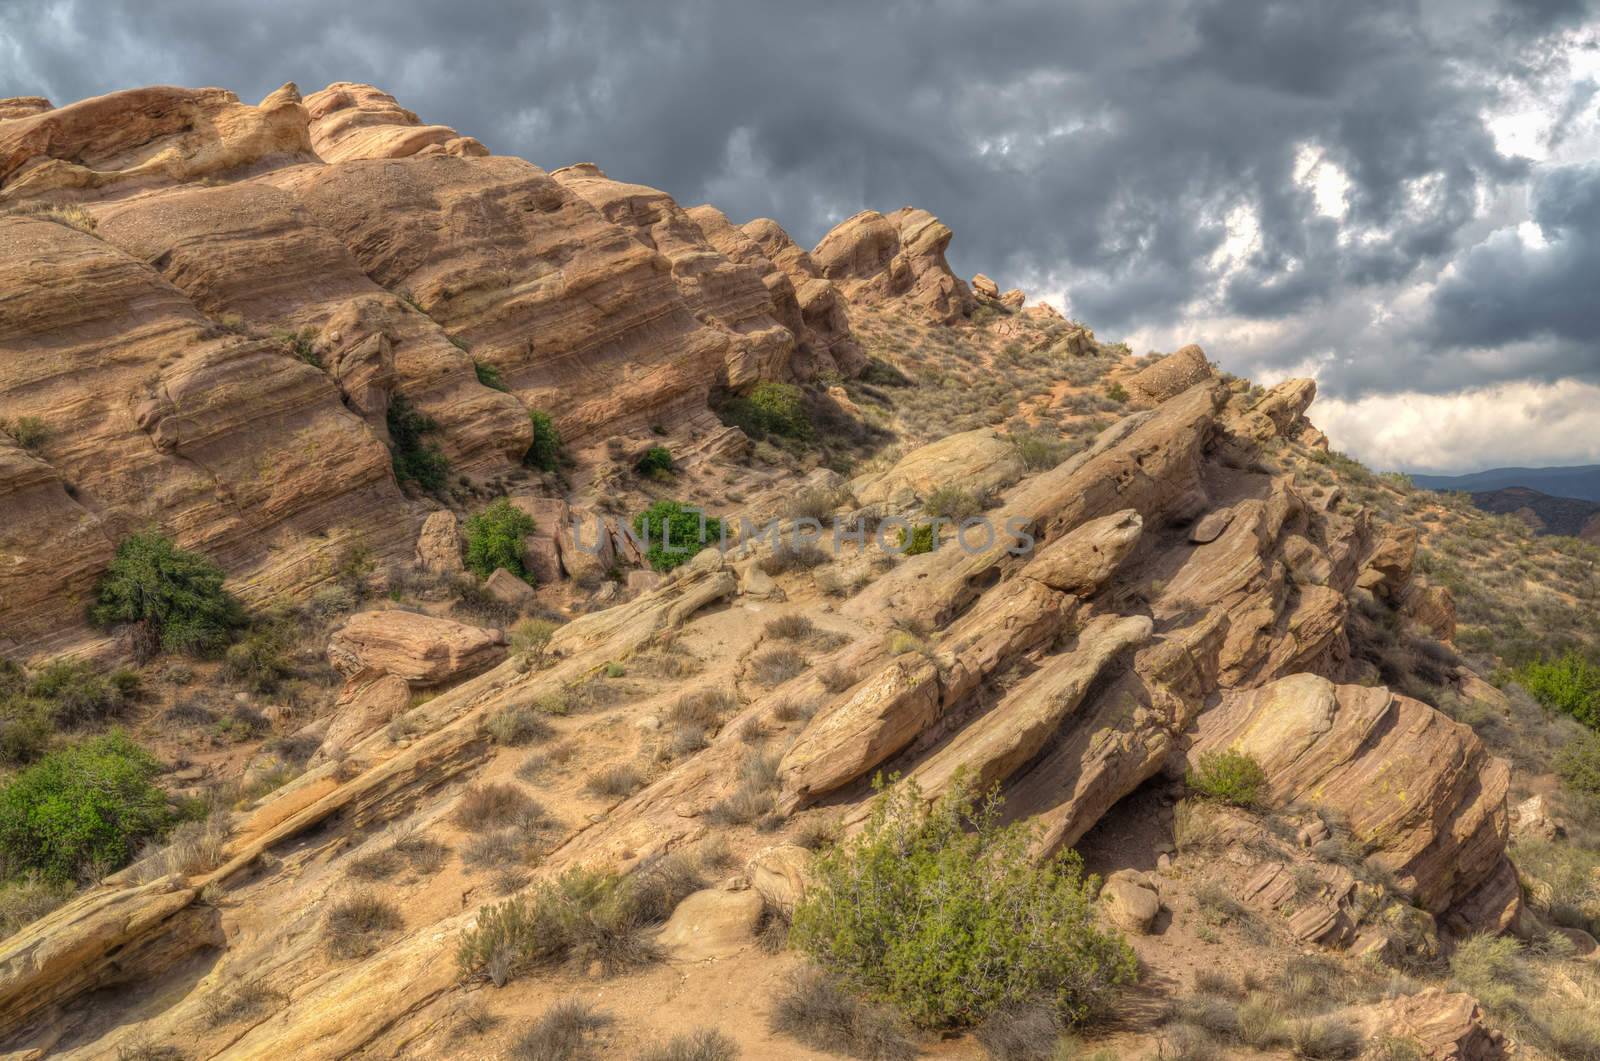 Spectacular formation with dramatic storm sky at Vazquez Rocks in Southern California.